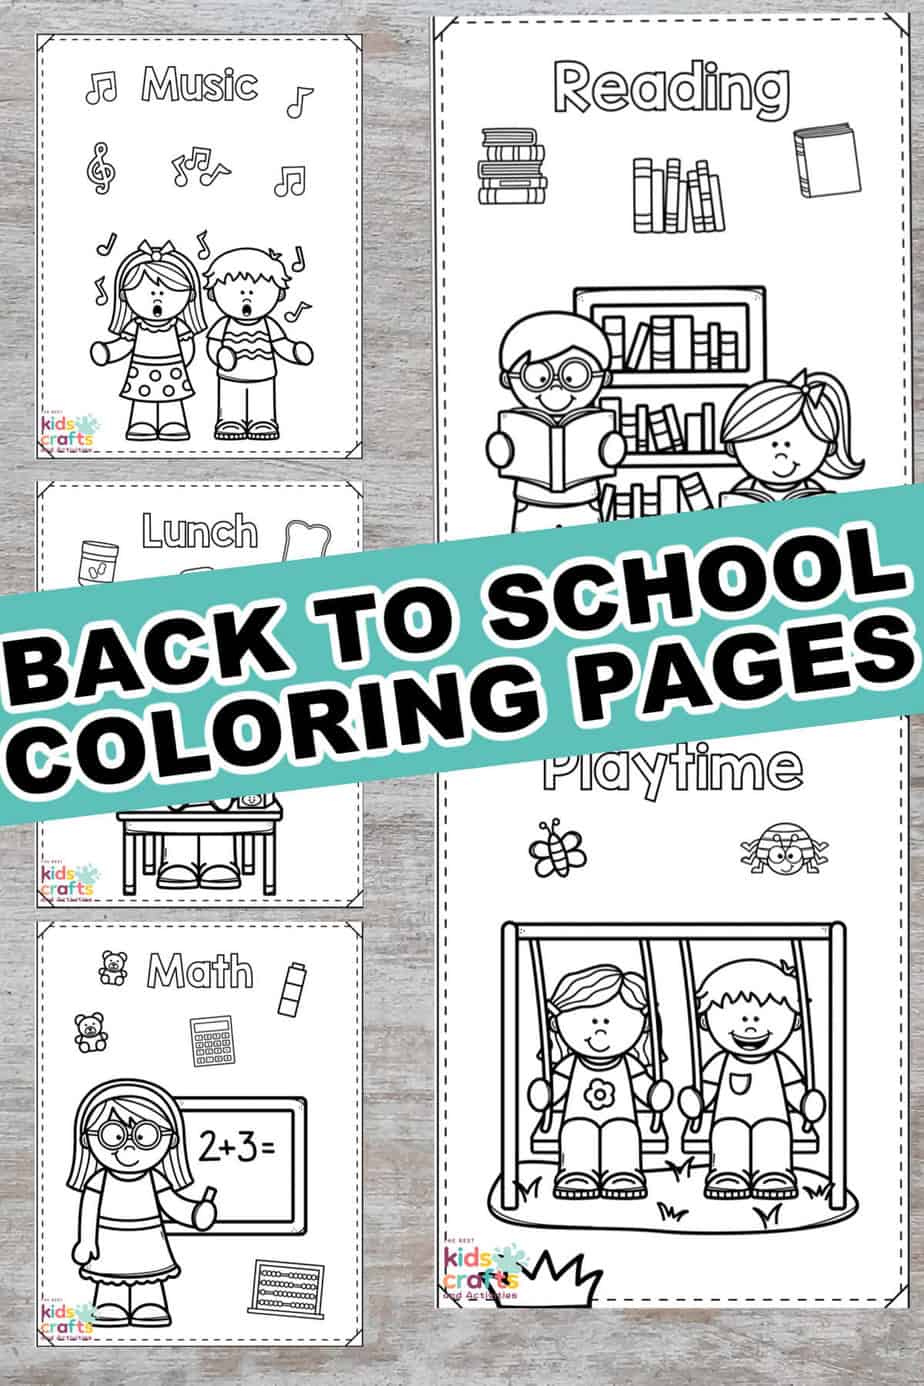 Back to school coloring pages 